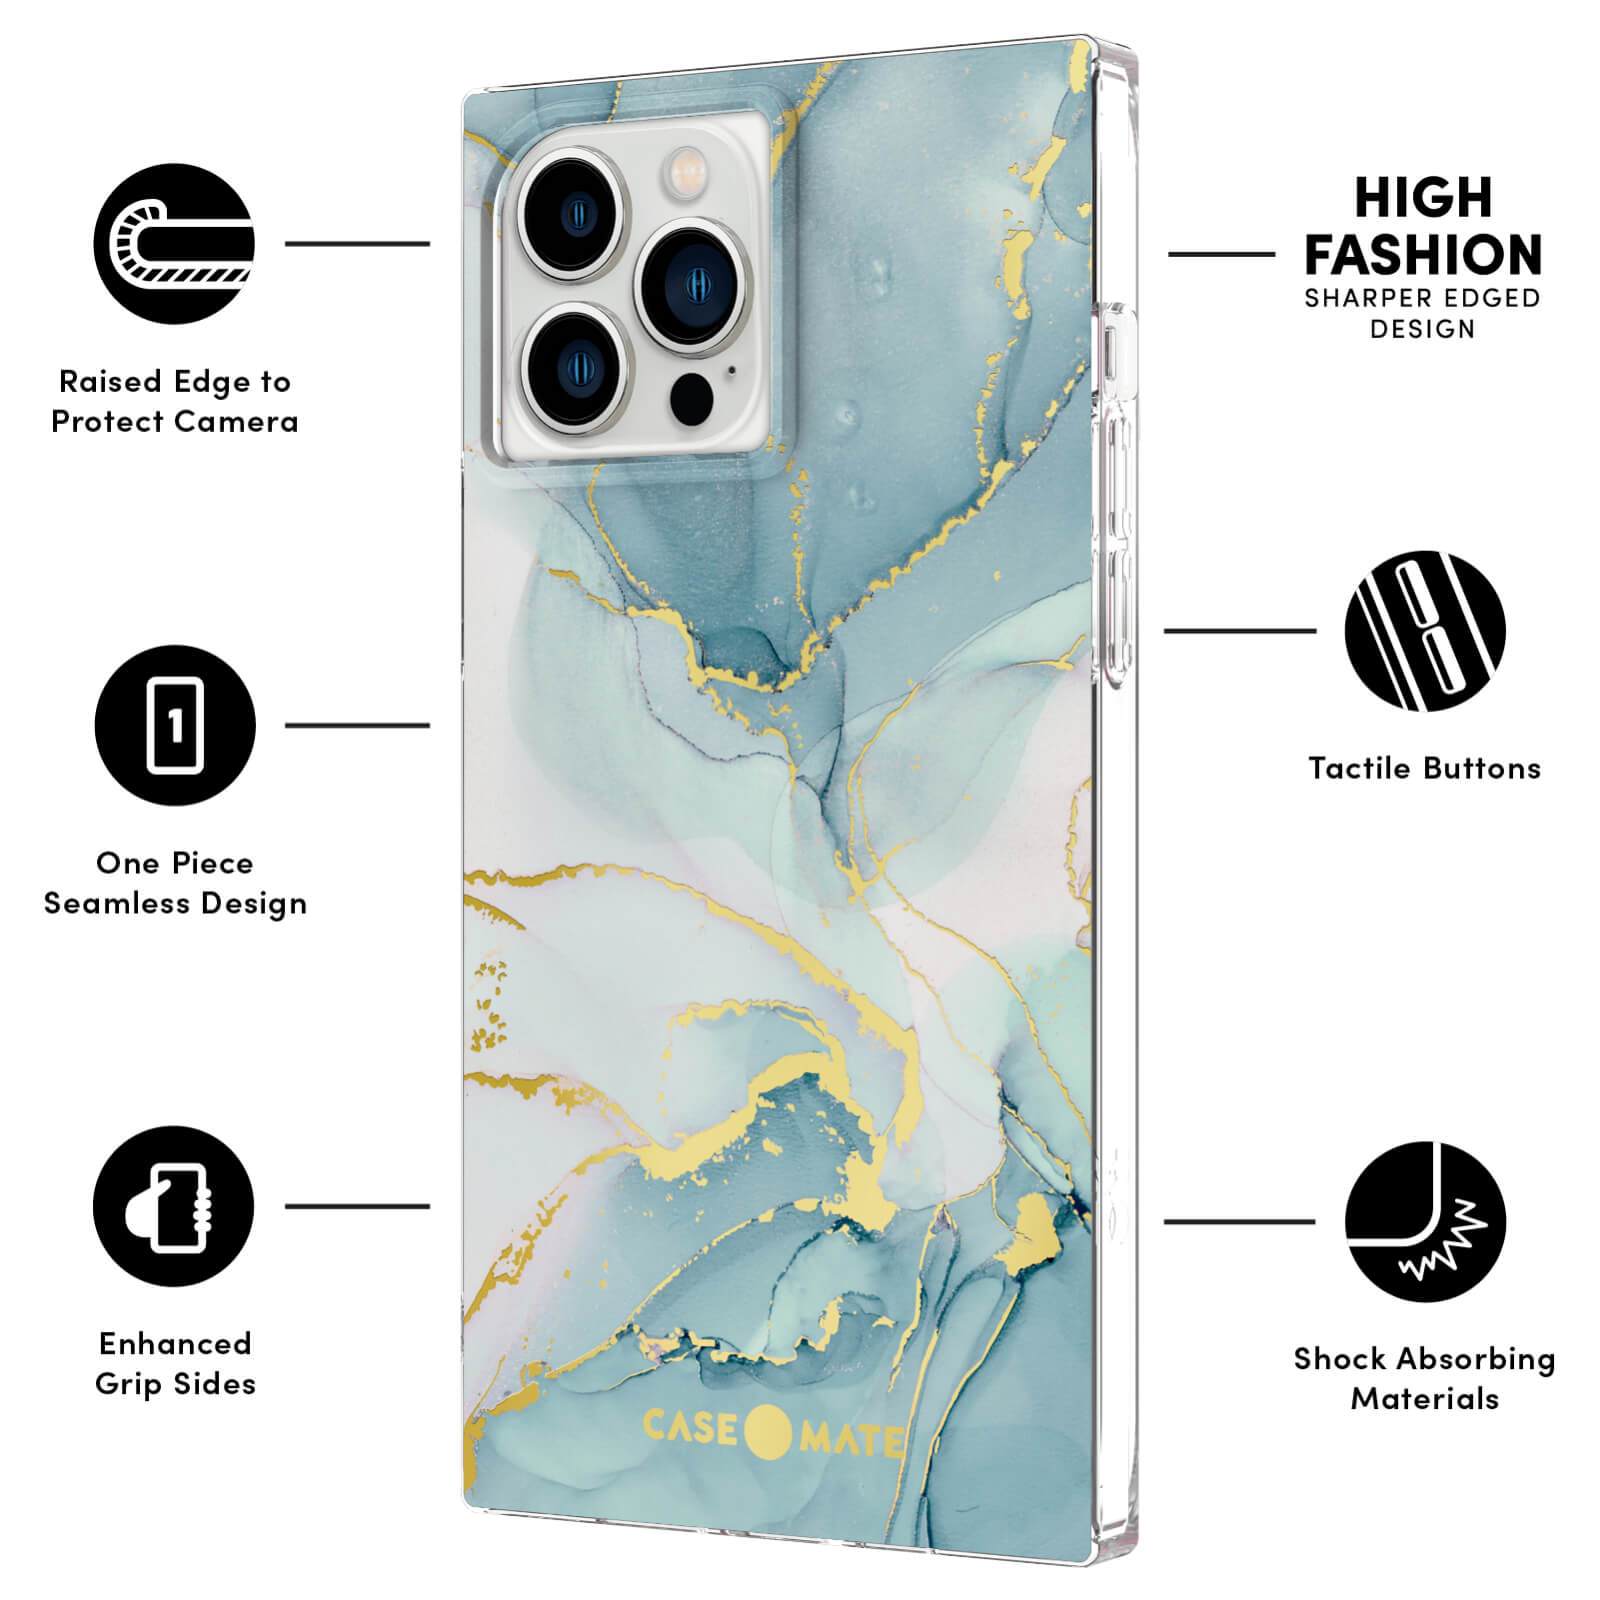 FEATURES: RAISED EDGE TO PROTECT CAMERA, ONE PIECE SEAMLESS DESIGN, ENHANCED GRIP SIDES, HIGH FASHION SHARPR EDGED DESIGN, TACTILE BUTTONS, SHOCK ABSORBING MATERIALS. COLOR::GLACIER MARBLE